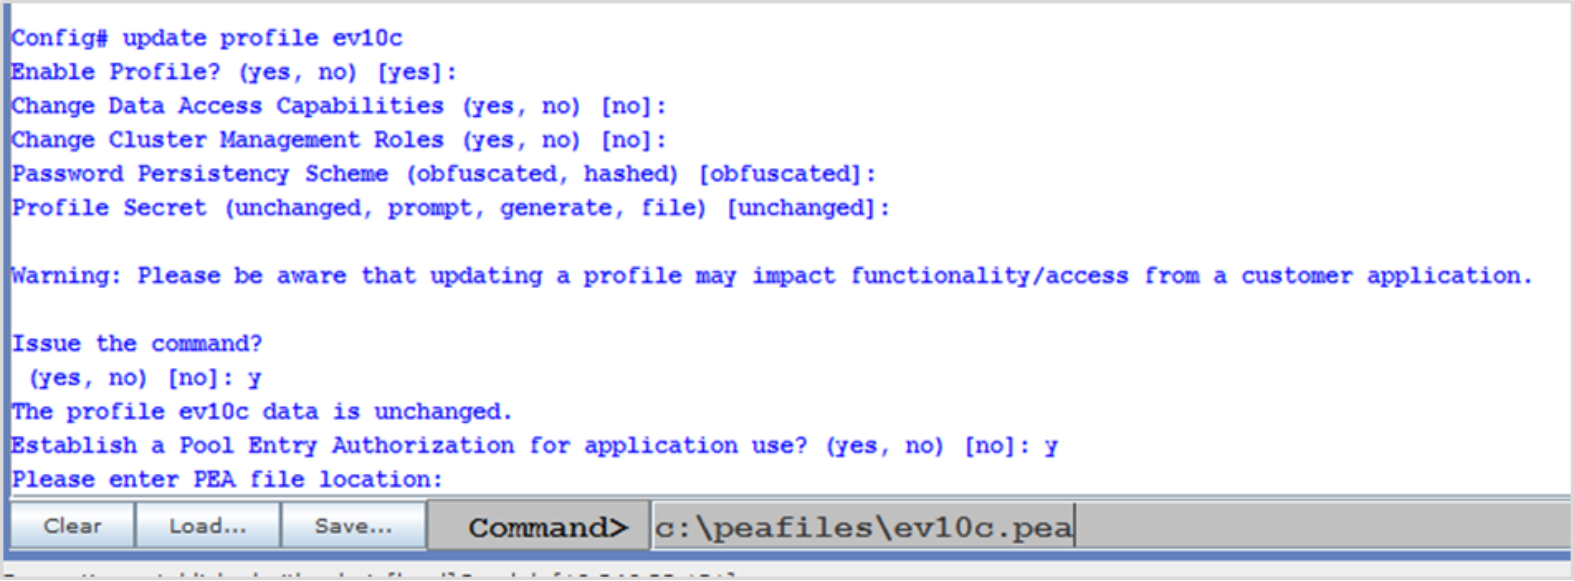 Shows output from the Centera viewer update profile command to generate a PEA file for a particular profile.